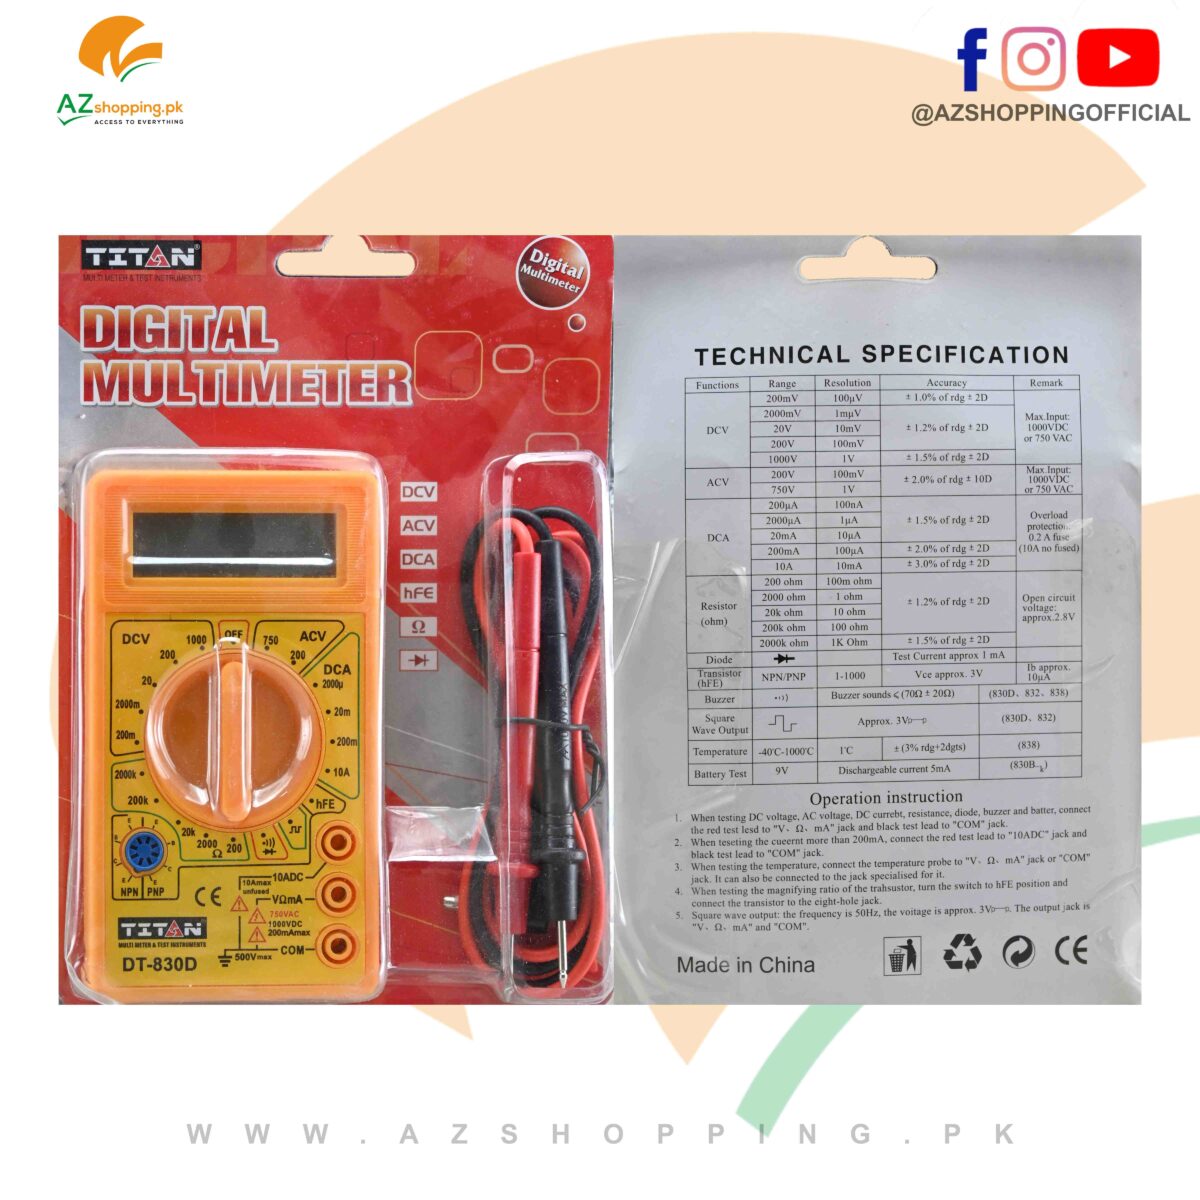 Digital Multimeter with Buzzer – Dmm Voltmeter, Voltage, Ampere, Diode, Hfe Continuity Tester, Ohm Meter Test Probe Dc / Ac - Model: DT-830D Series